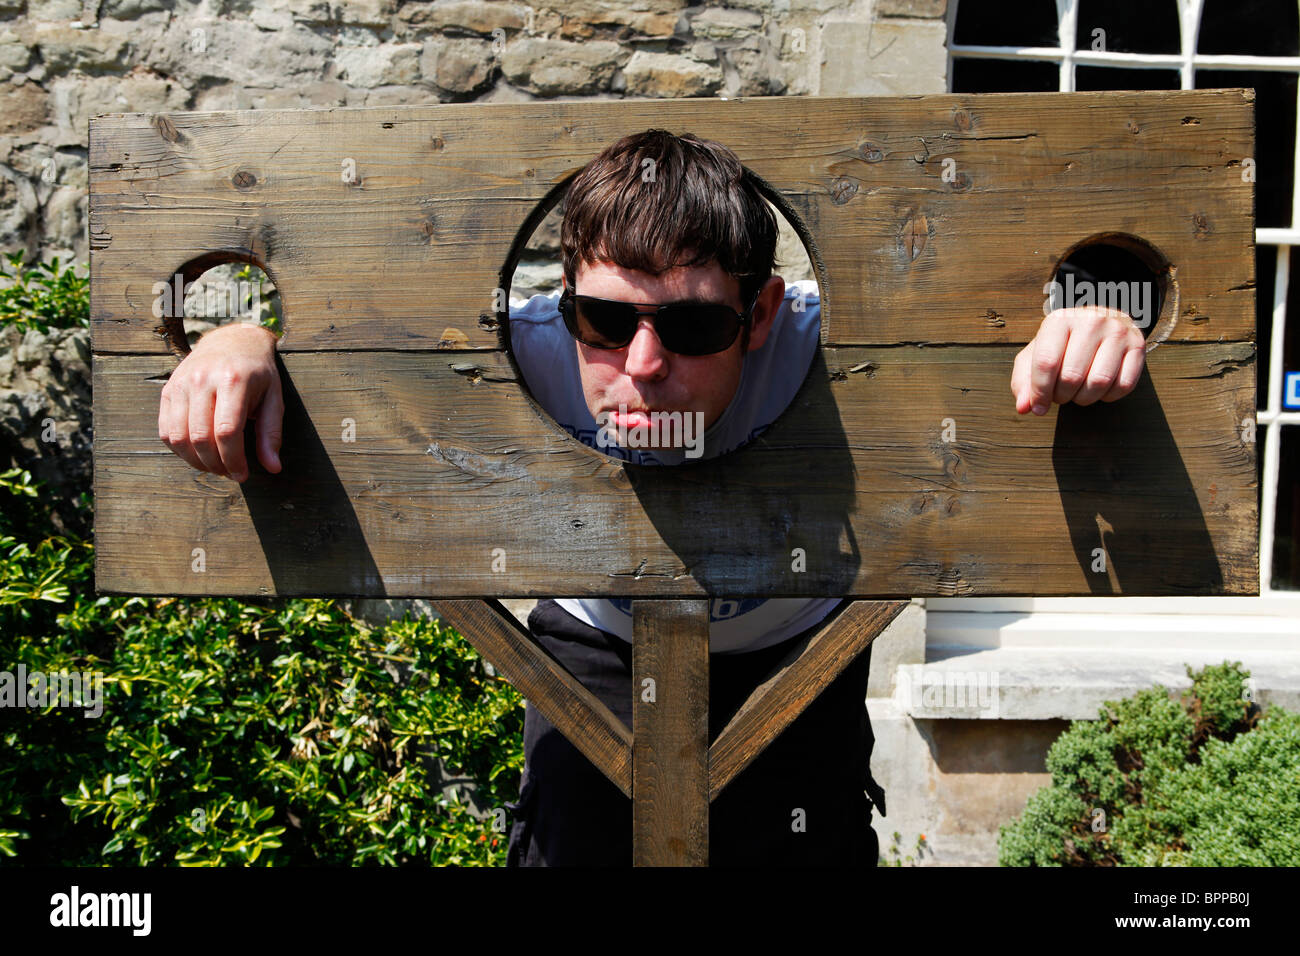 a-man-in-sunglasses-pulls-a-funny-face-while-in-stocks-in-england-BPPB0J.jpg